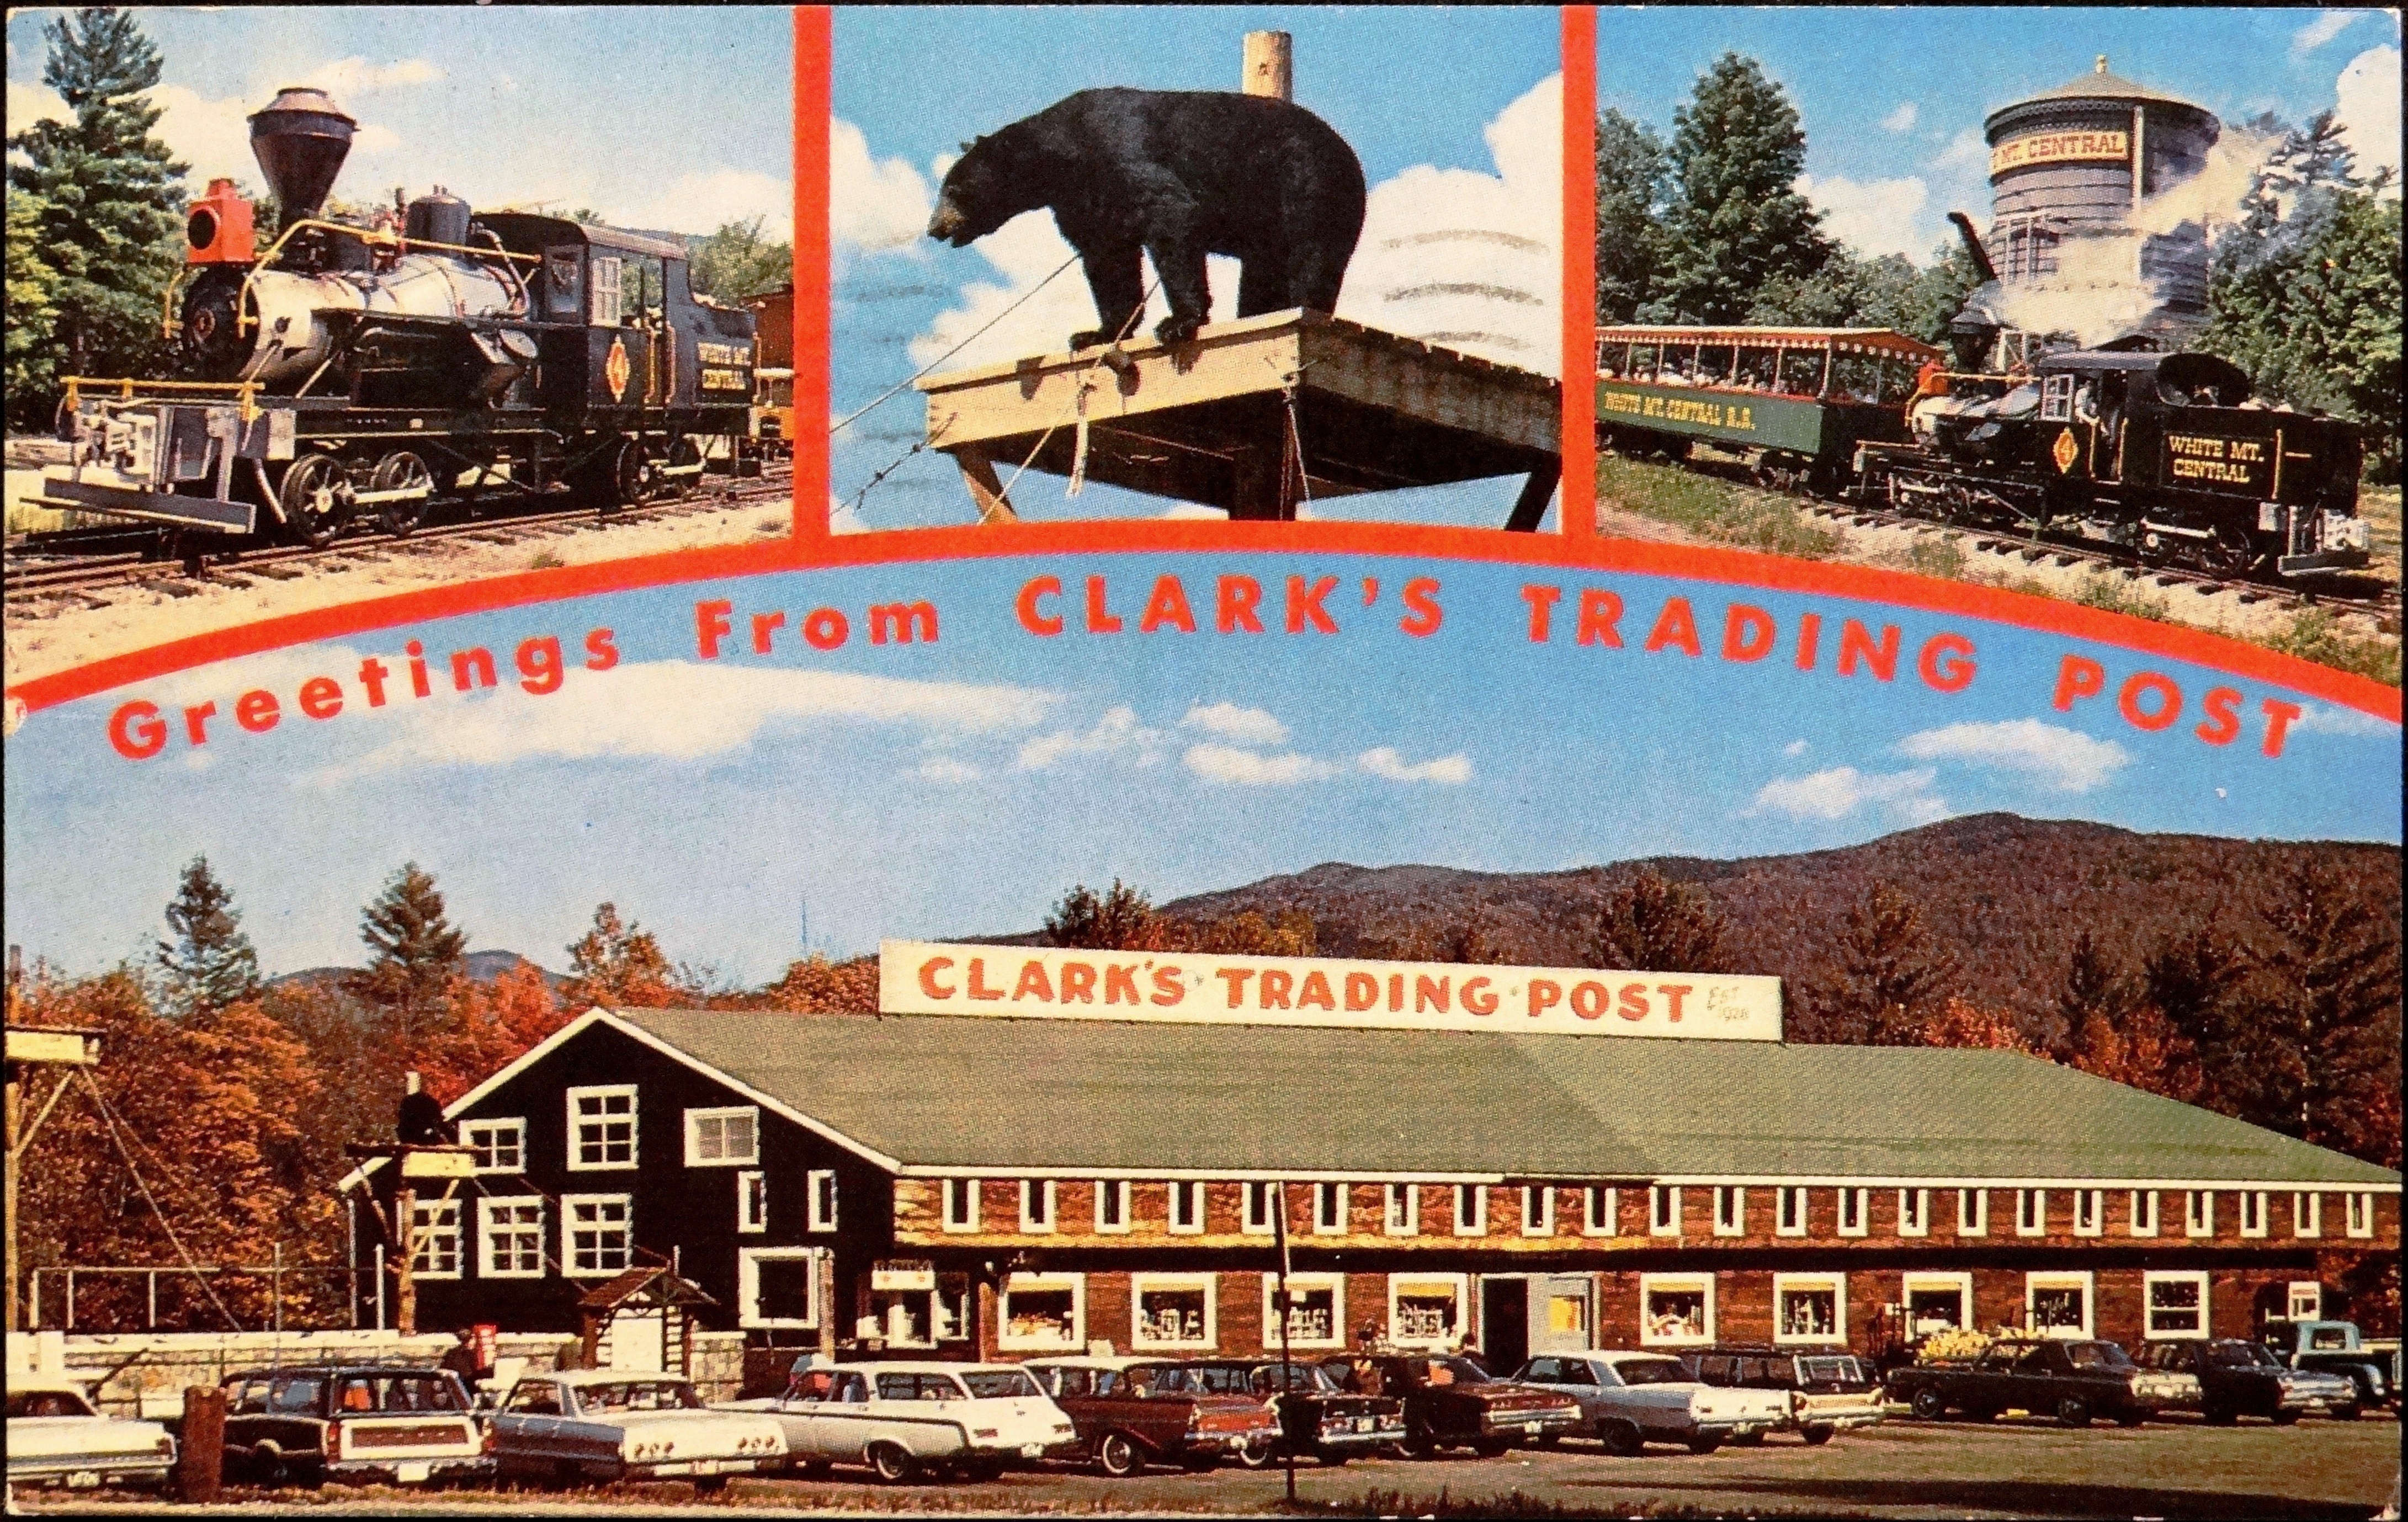 Clark's Trading Post - 110 Daniel Webster Highway, Lincoln, New Hampshire U.S.A. - 1960s